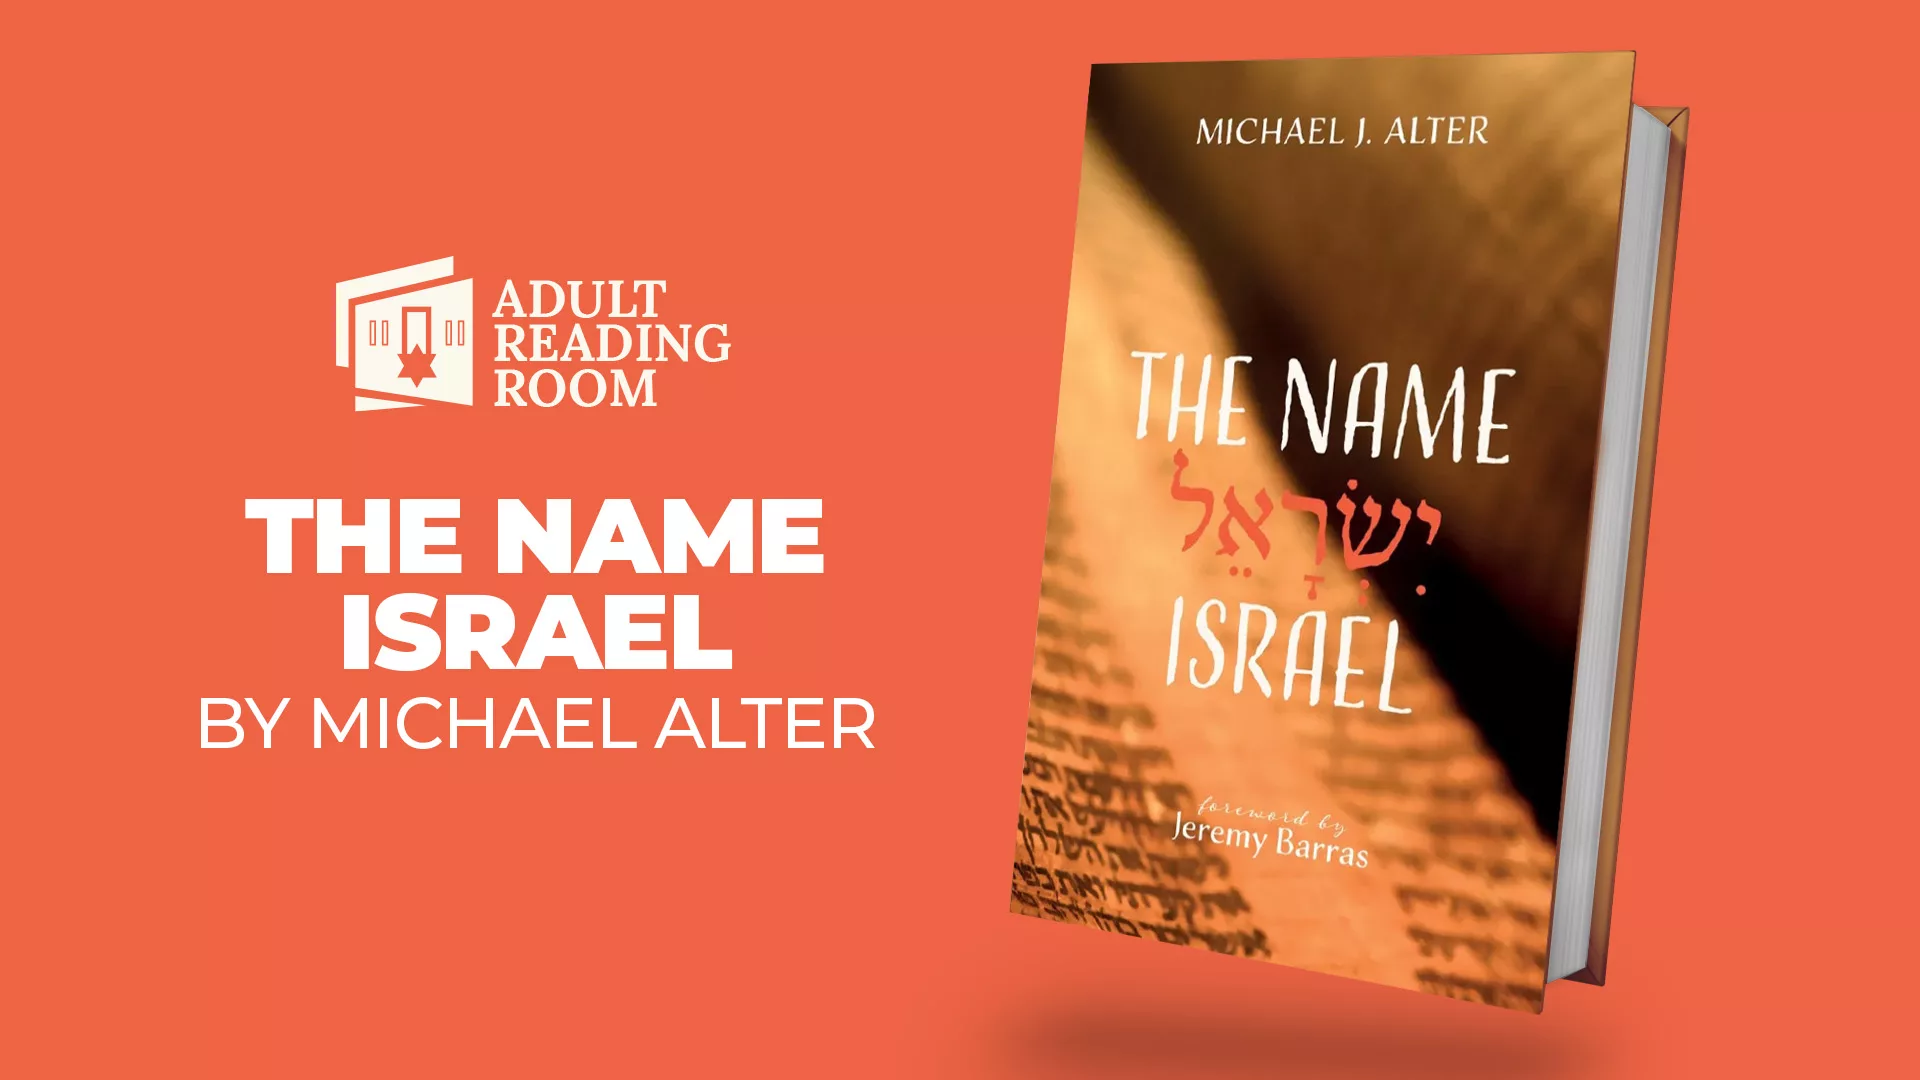 The name Israel by Michael Alter book cover adult reading room